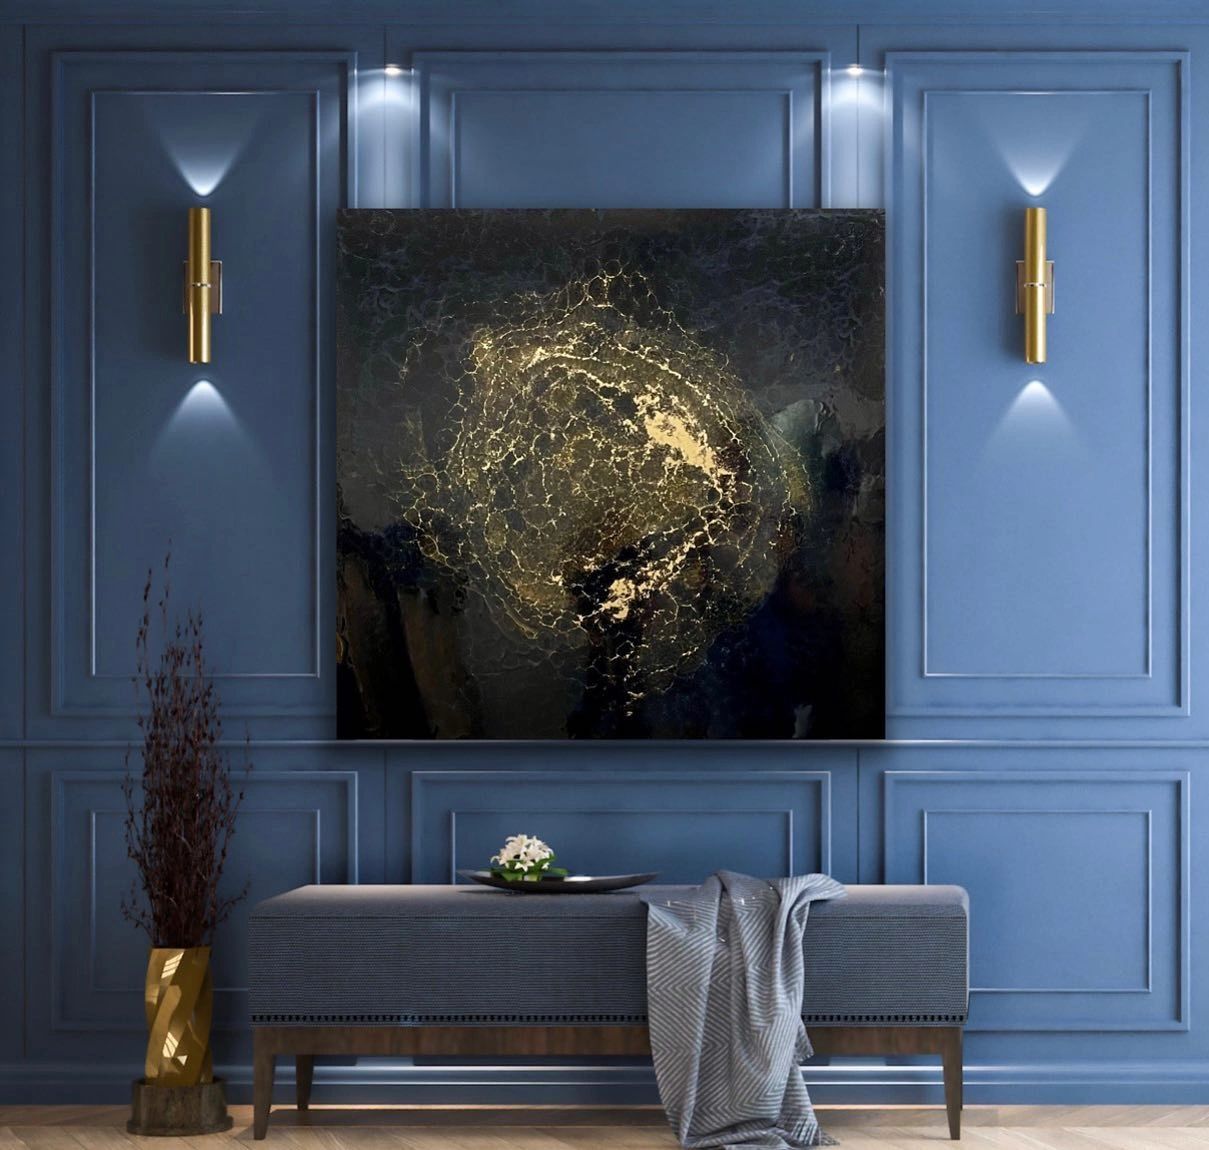 6' x 6' Statement Piece by Rick Lowe Fine Art. Resin Fusion of black and gold Infinity series.